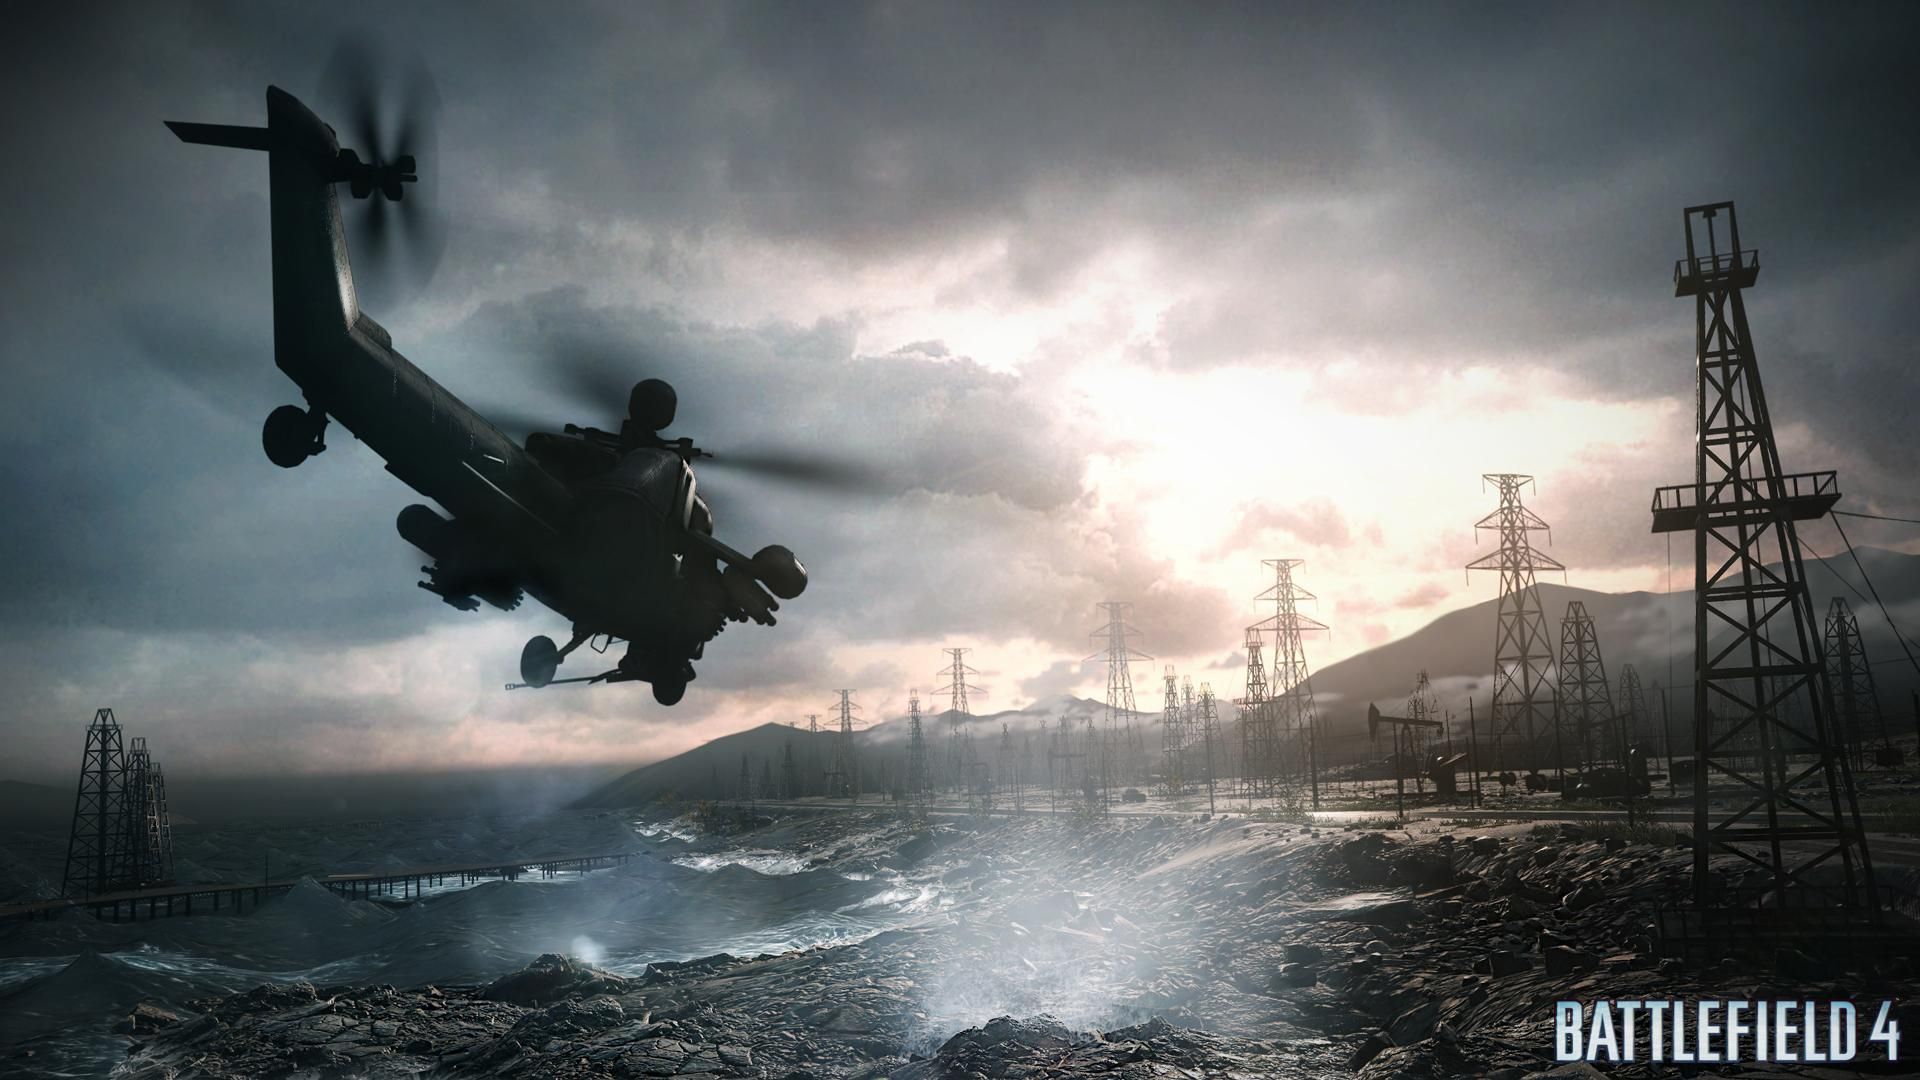 Here are a few Battlefield HD wallpapers for your desktop